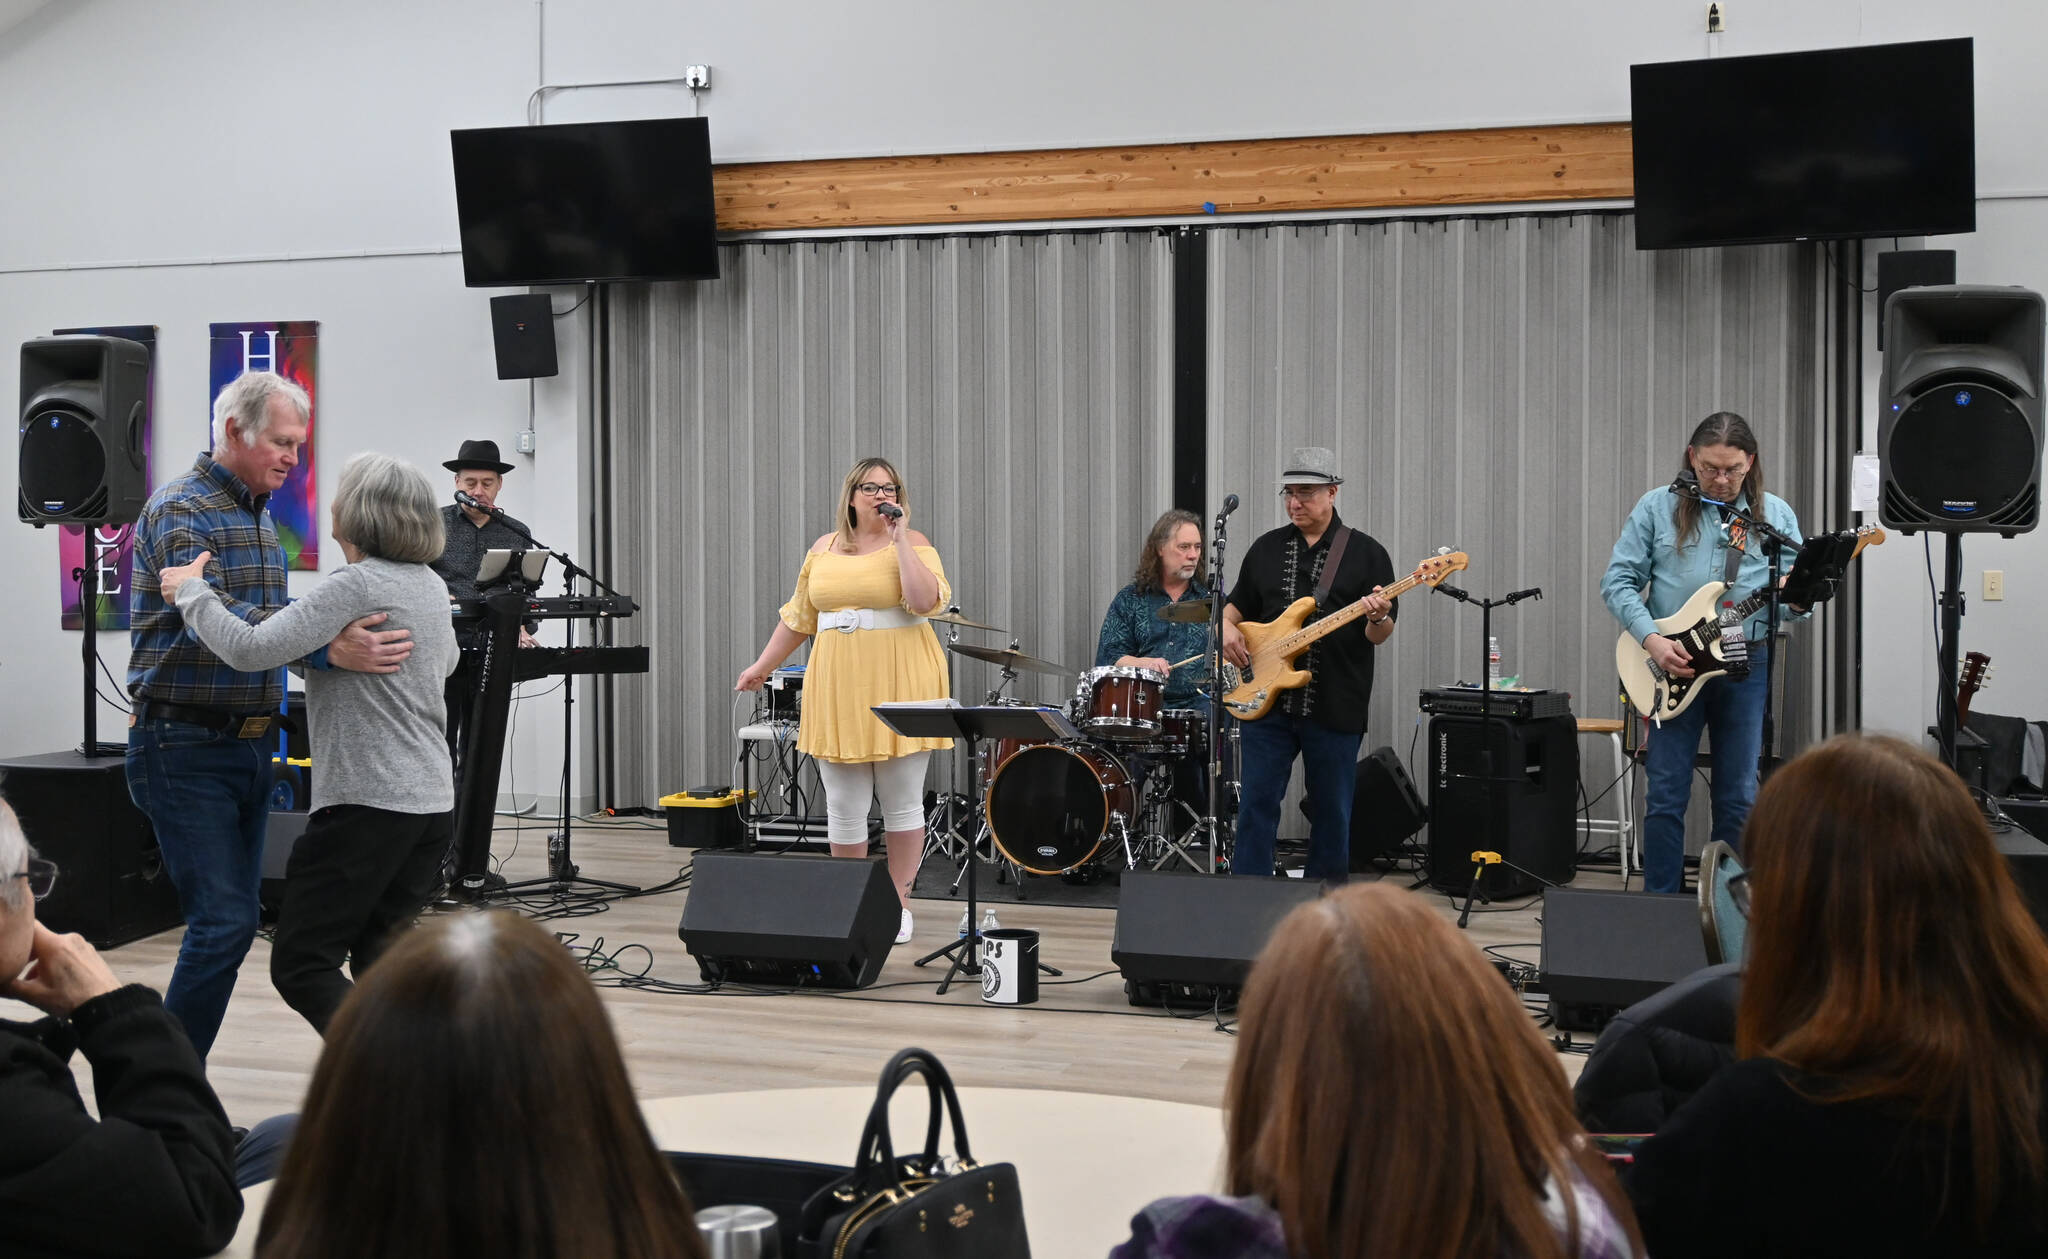 Black Diamond Junction offers some rockin’ dance tunes at Trinity United Methodist Church during the Sequim Sunshine Festival on March 4.